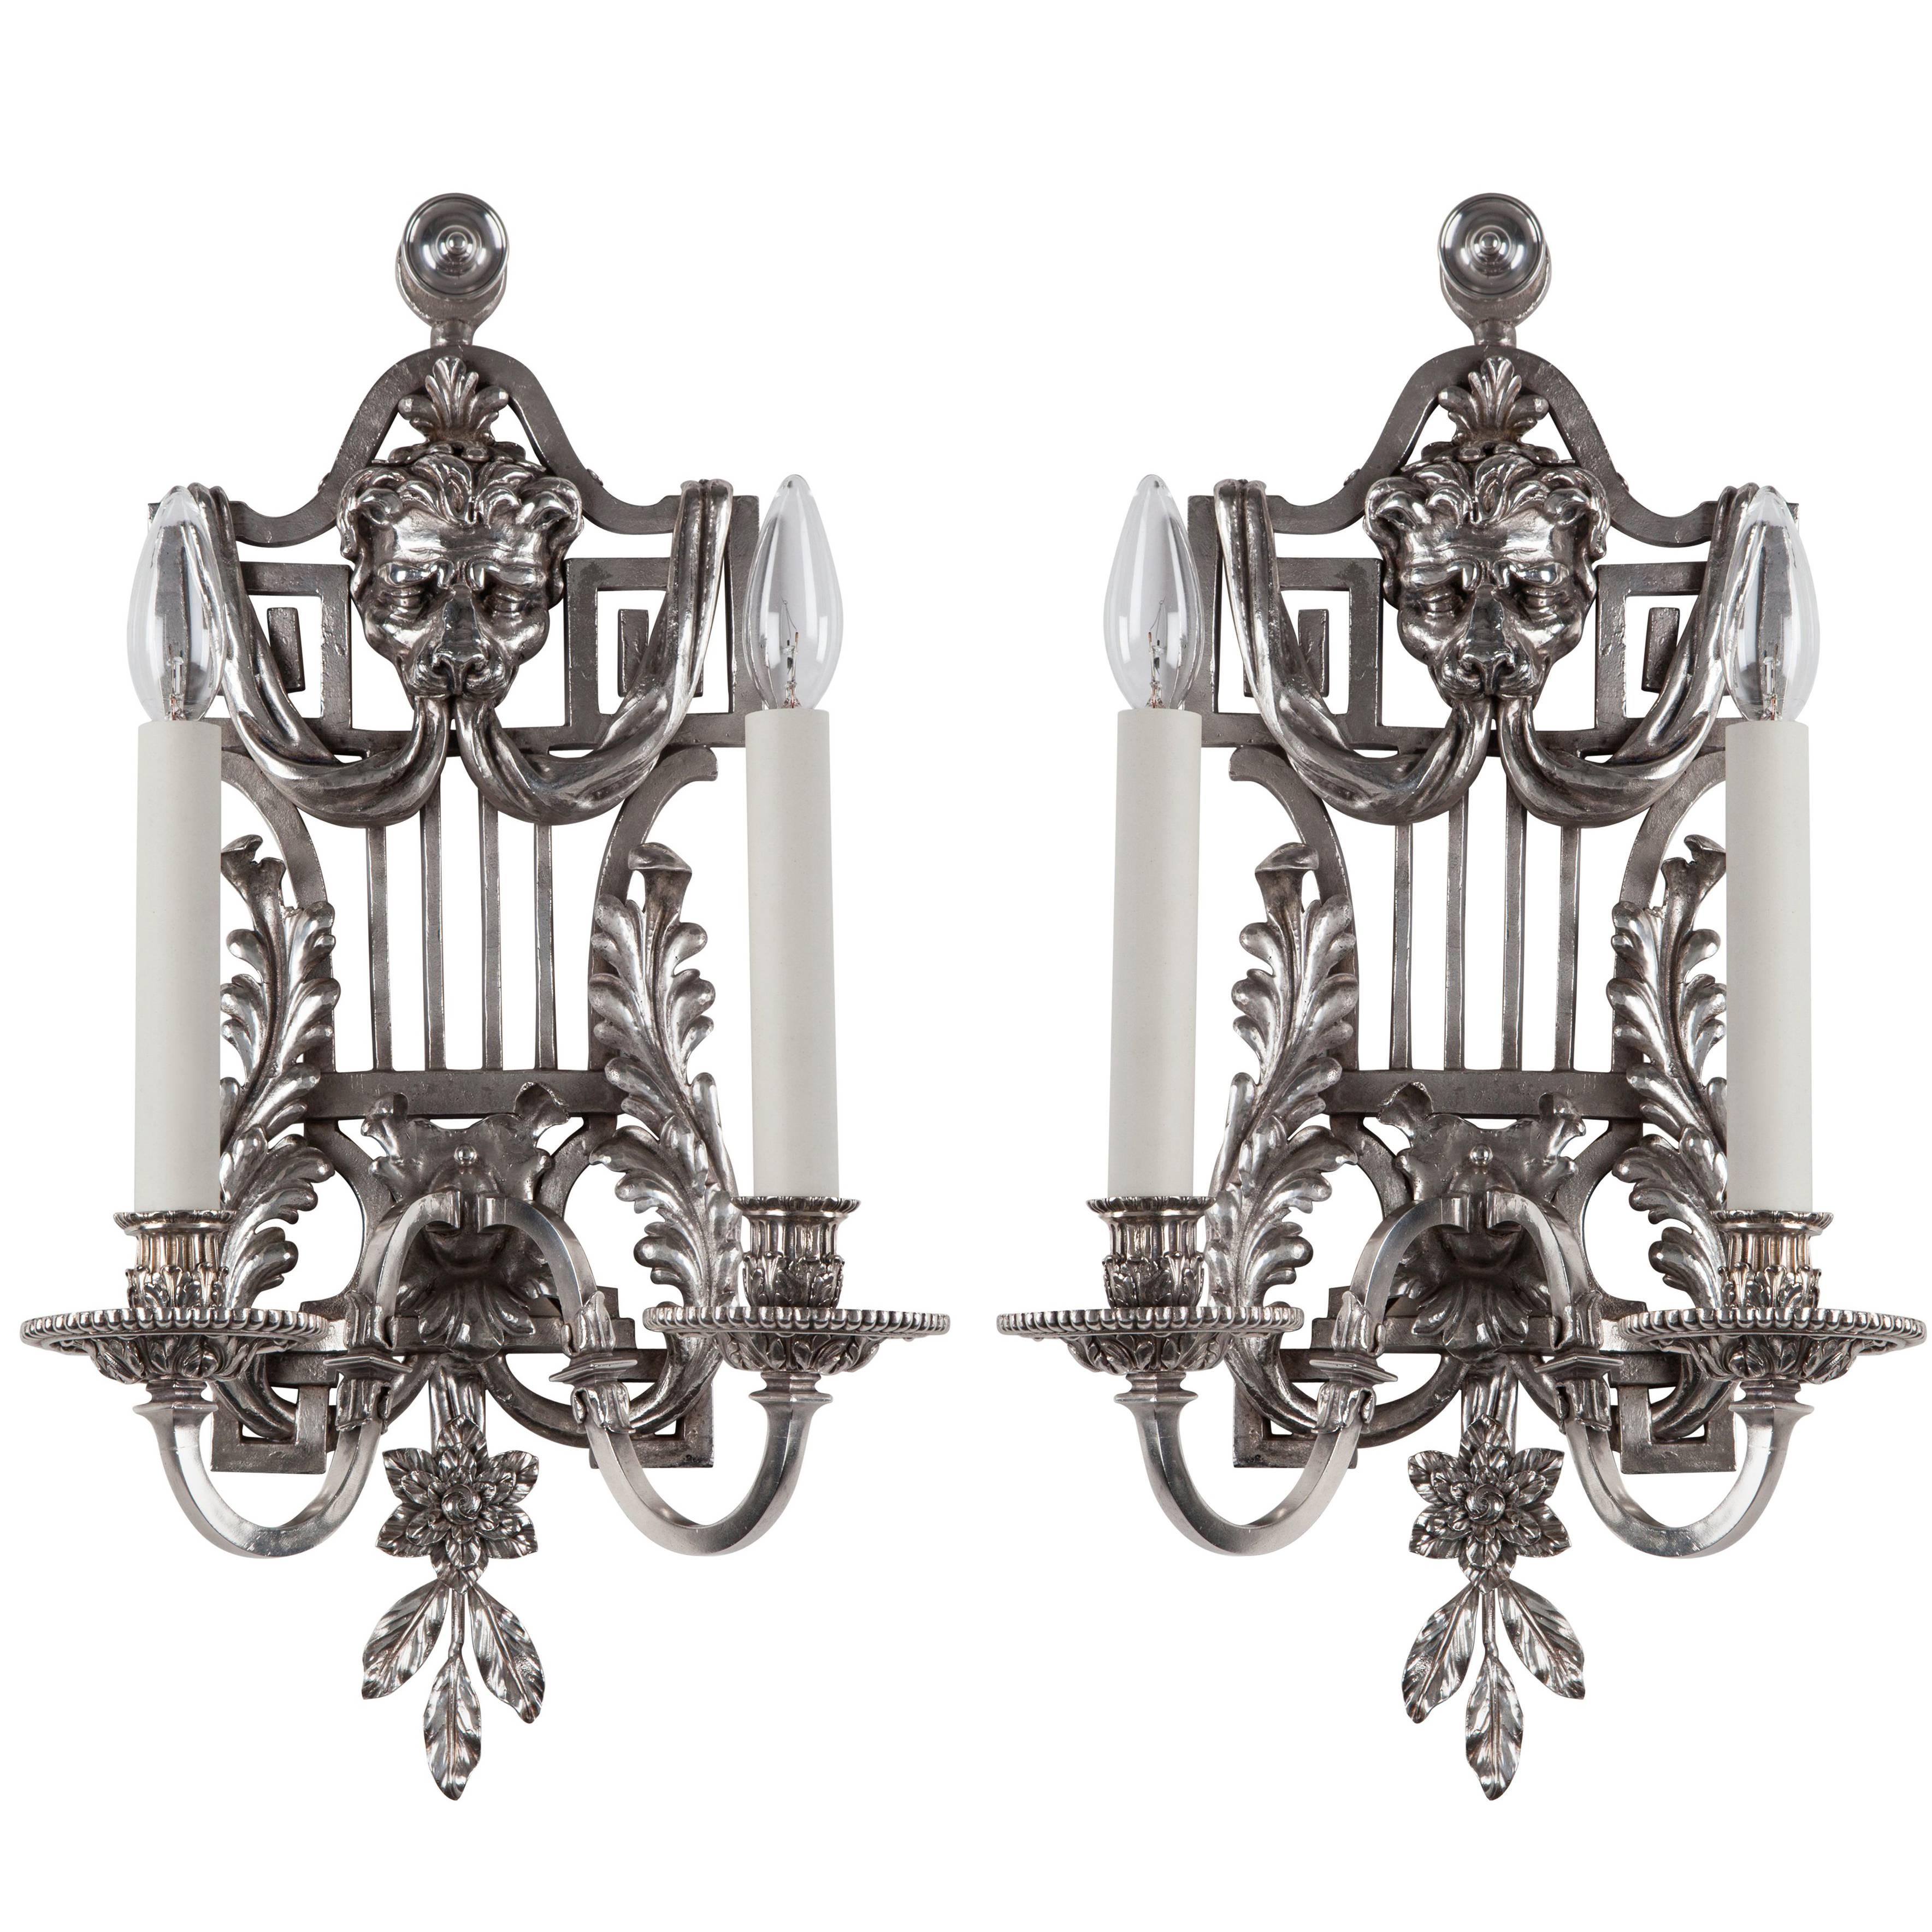 Edward F. Caldwell Silverplate Sconces with Lyre Form Backplates, circa 1900s